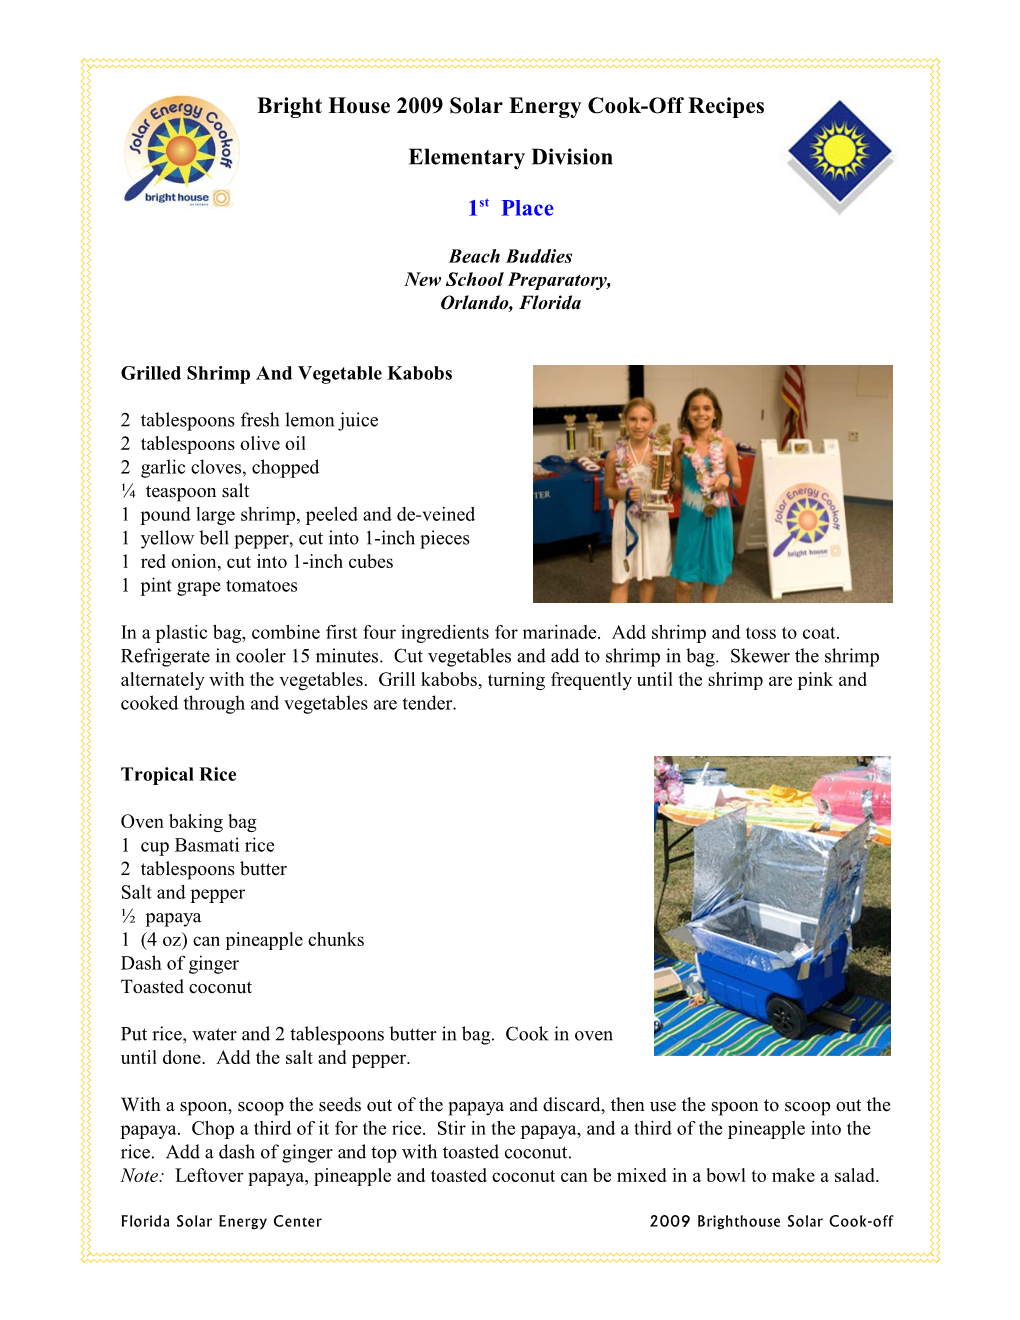 Bright House 2009 Solar Energy Cook-Off Recipes Elementary